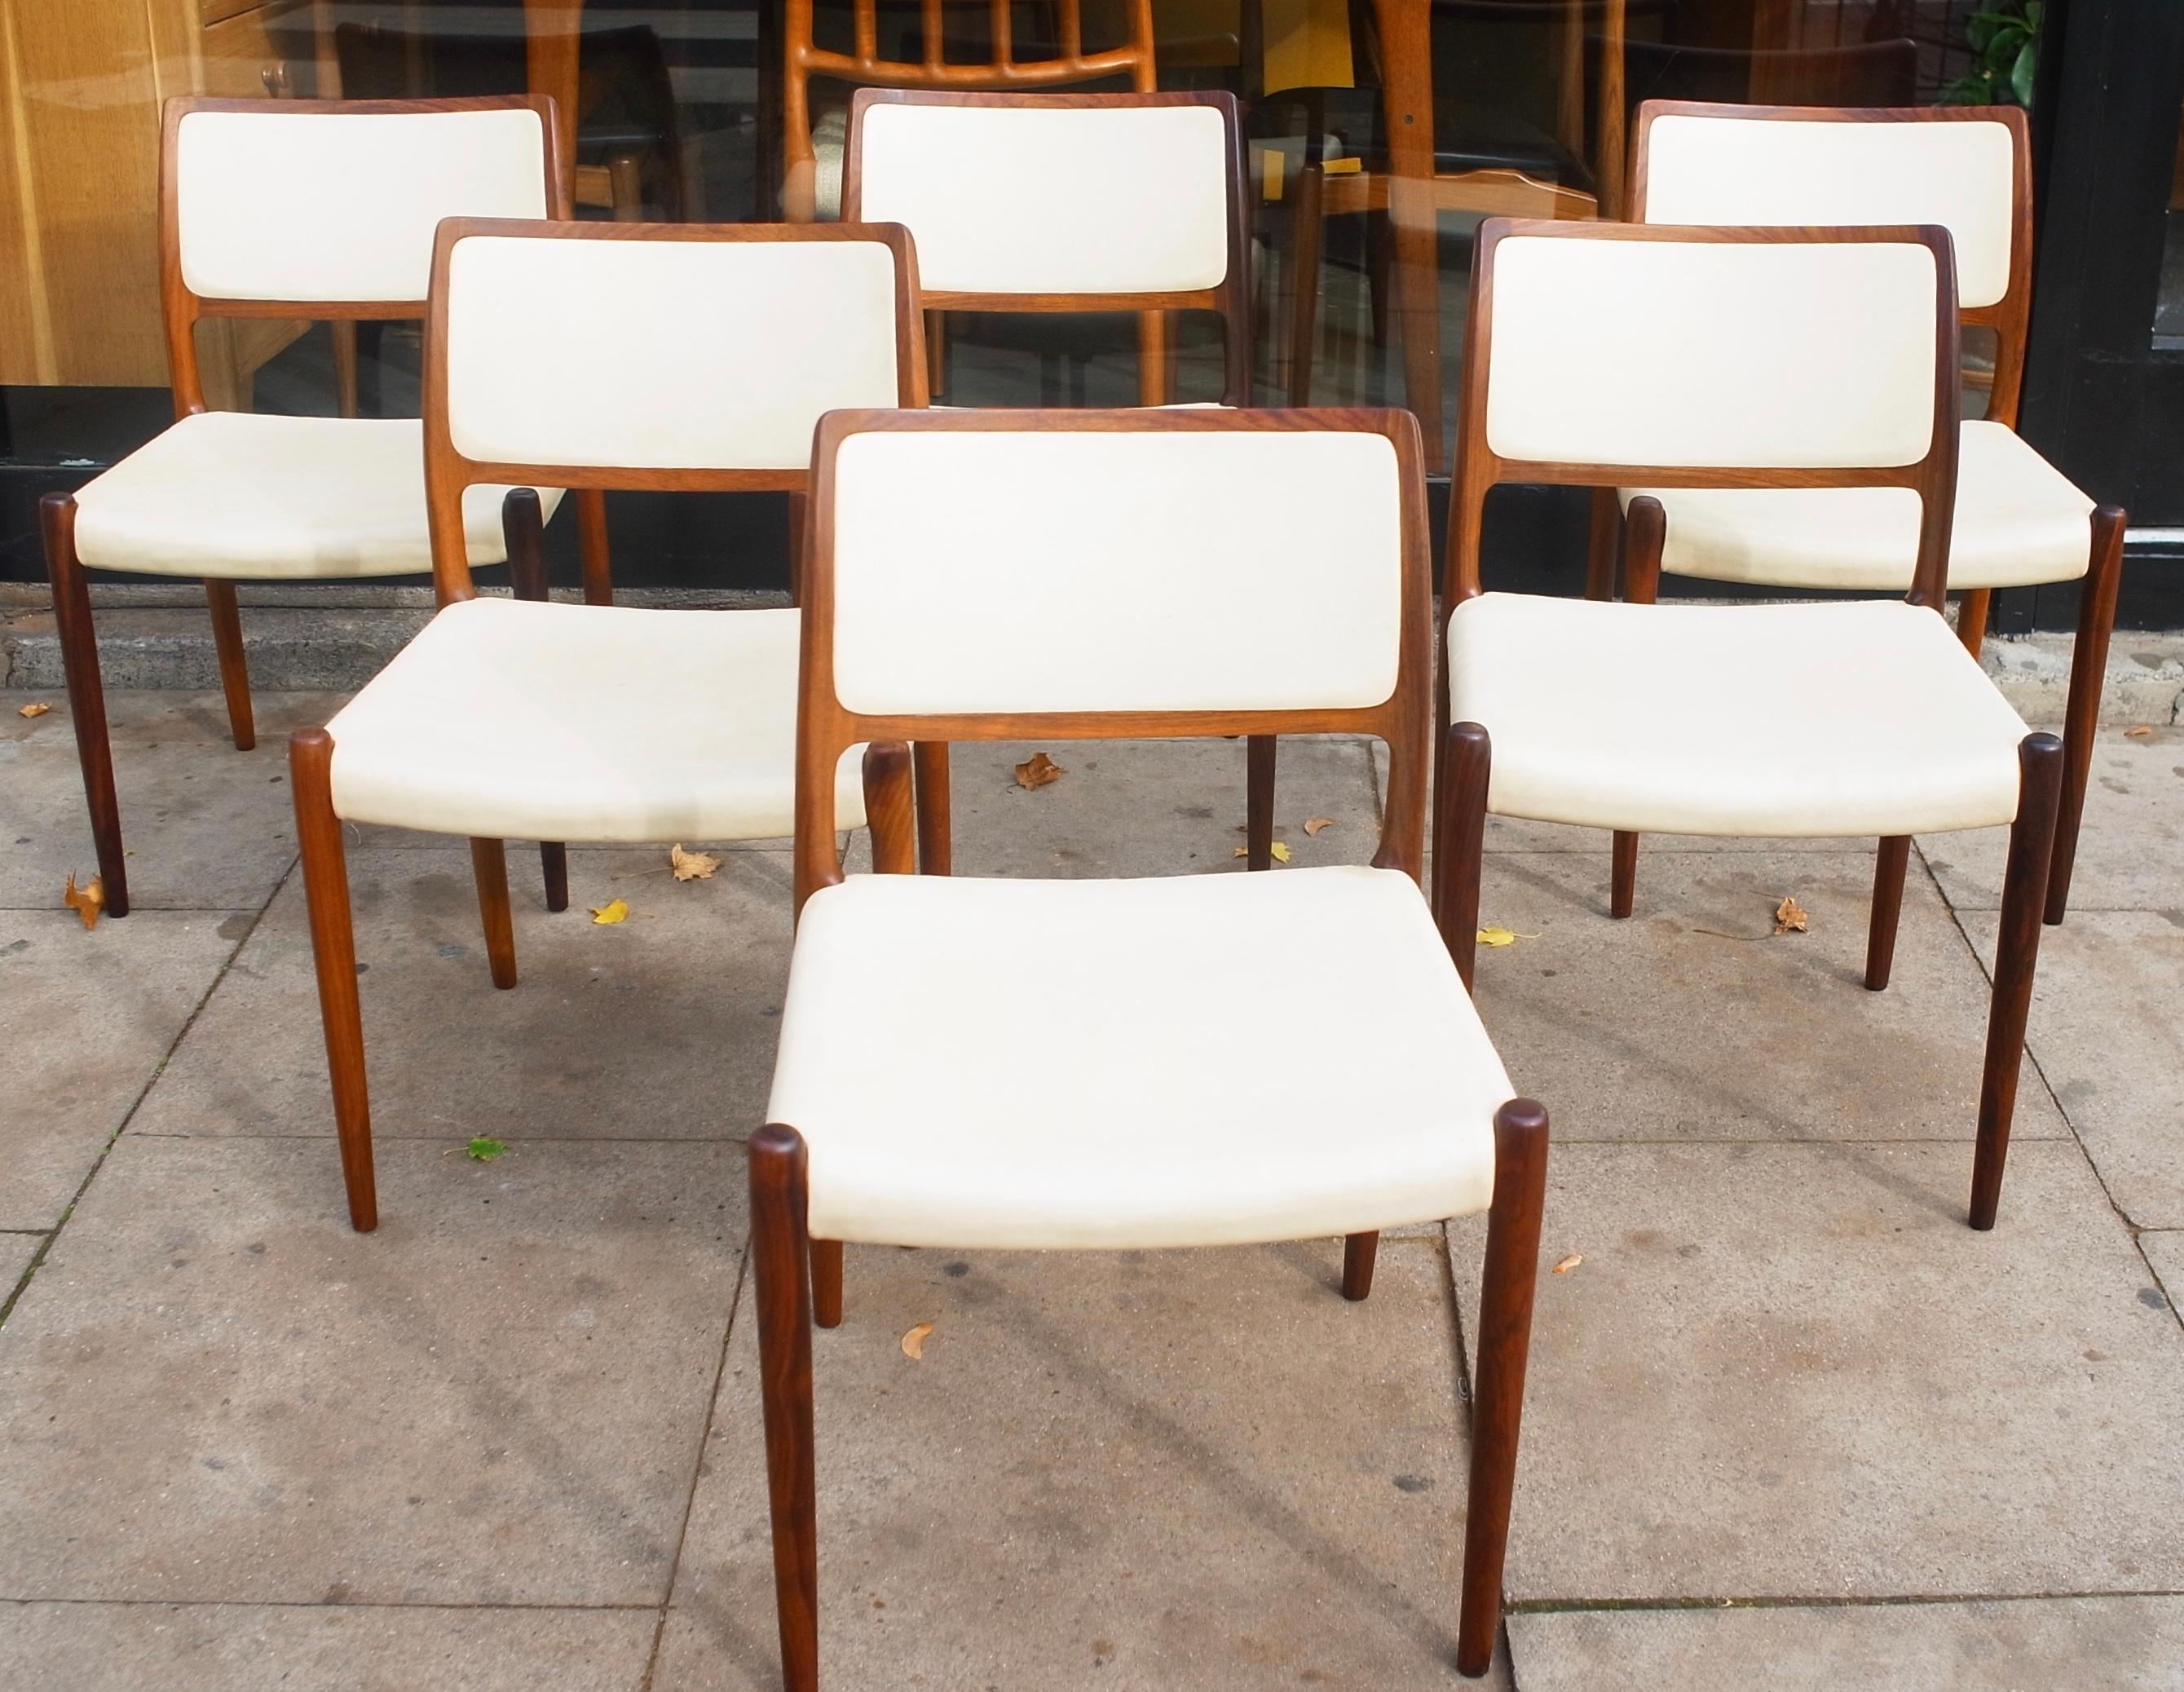 A stylish and beautiful  vintage set of six dining chairs model 80 designed by Niels Moller for J.L Møllers Møbelfabrik, Denmark 1968. These chairs are made of solid Hardwood which is in reasonable original condition, with only a little wear to the